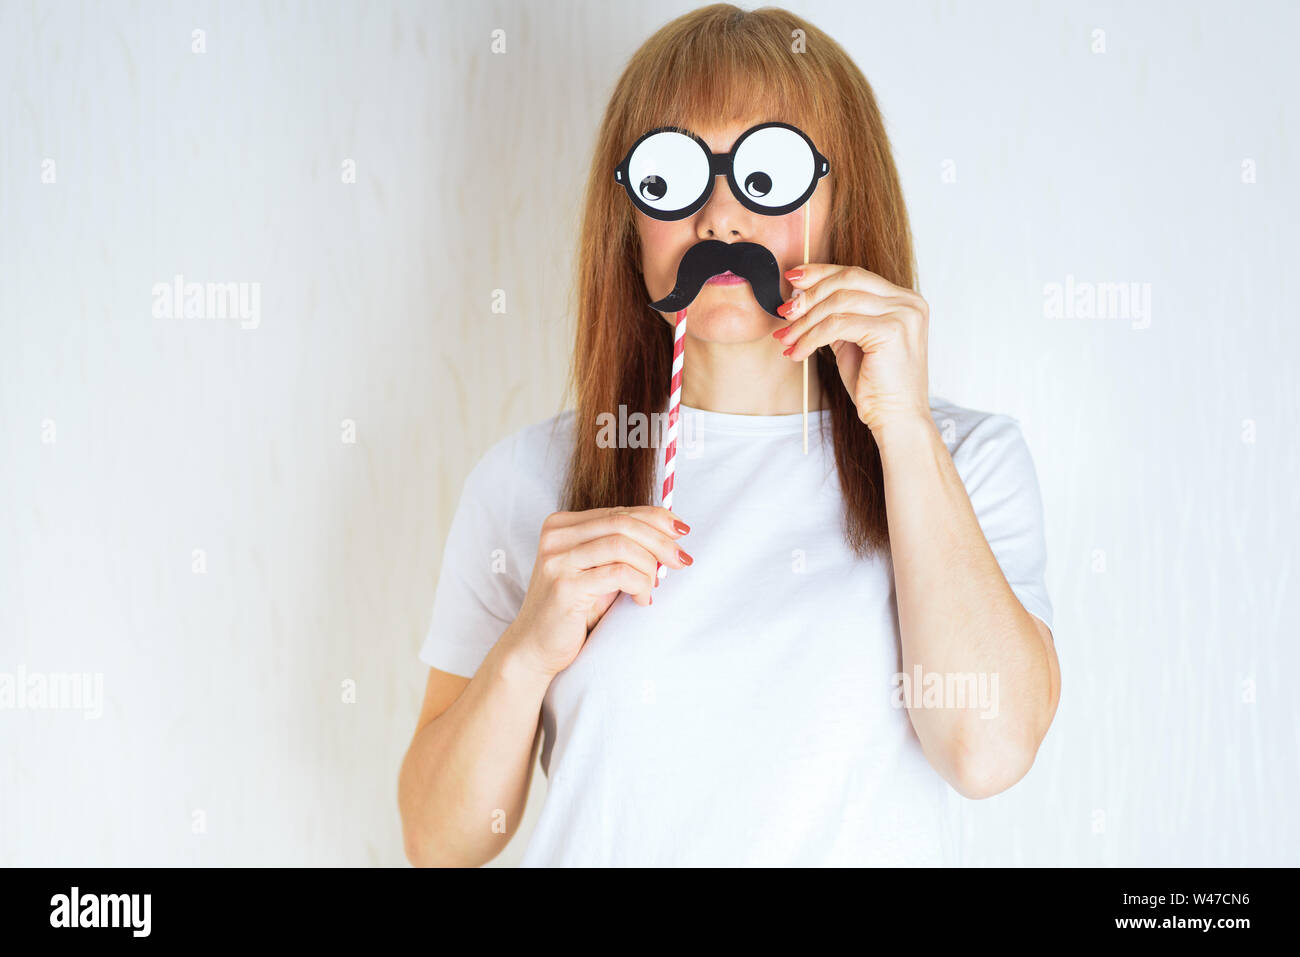 Fake nose and glasses disguise with mustache Stock Photo